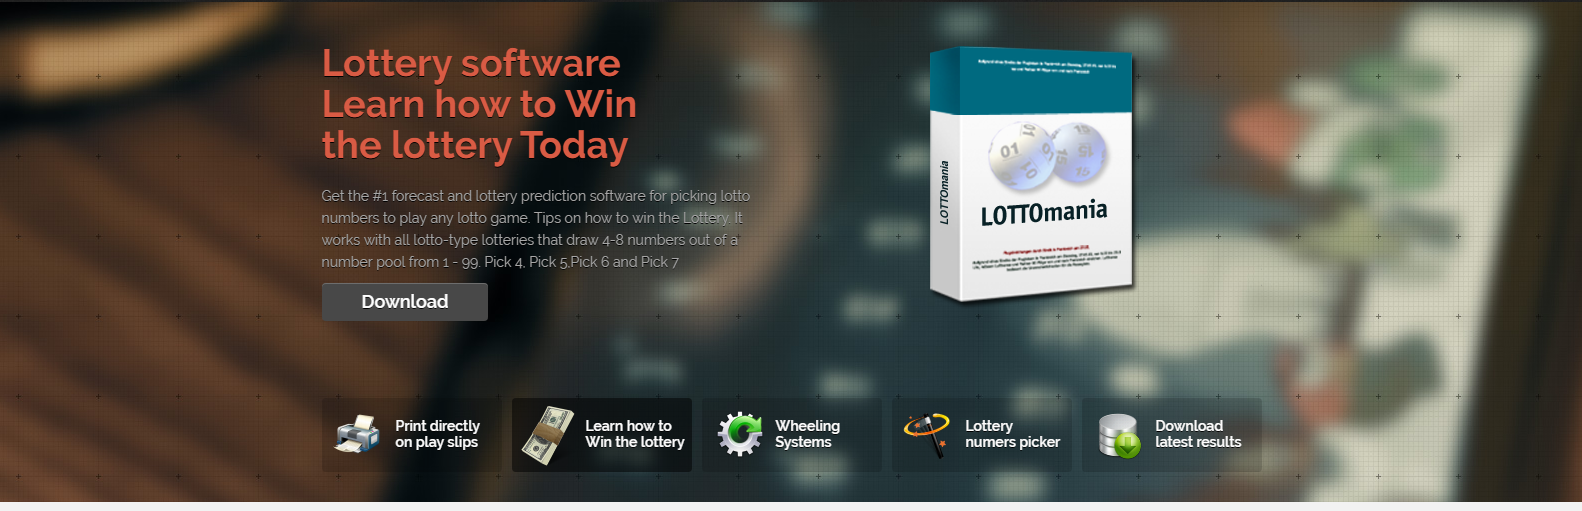 Powerball lottery software